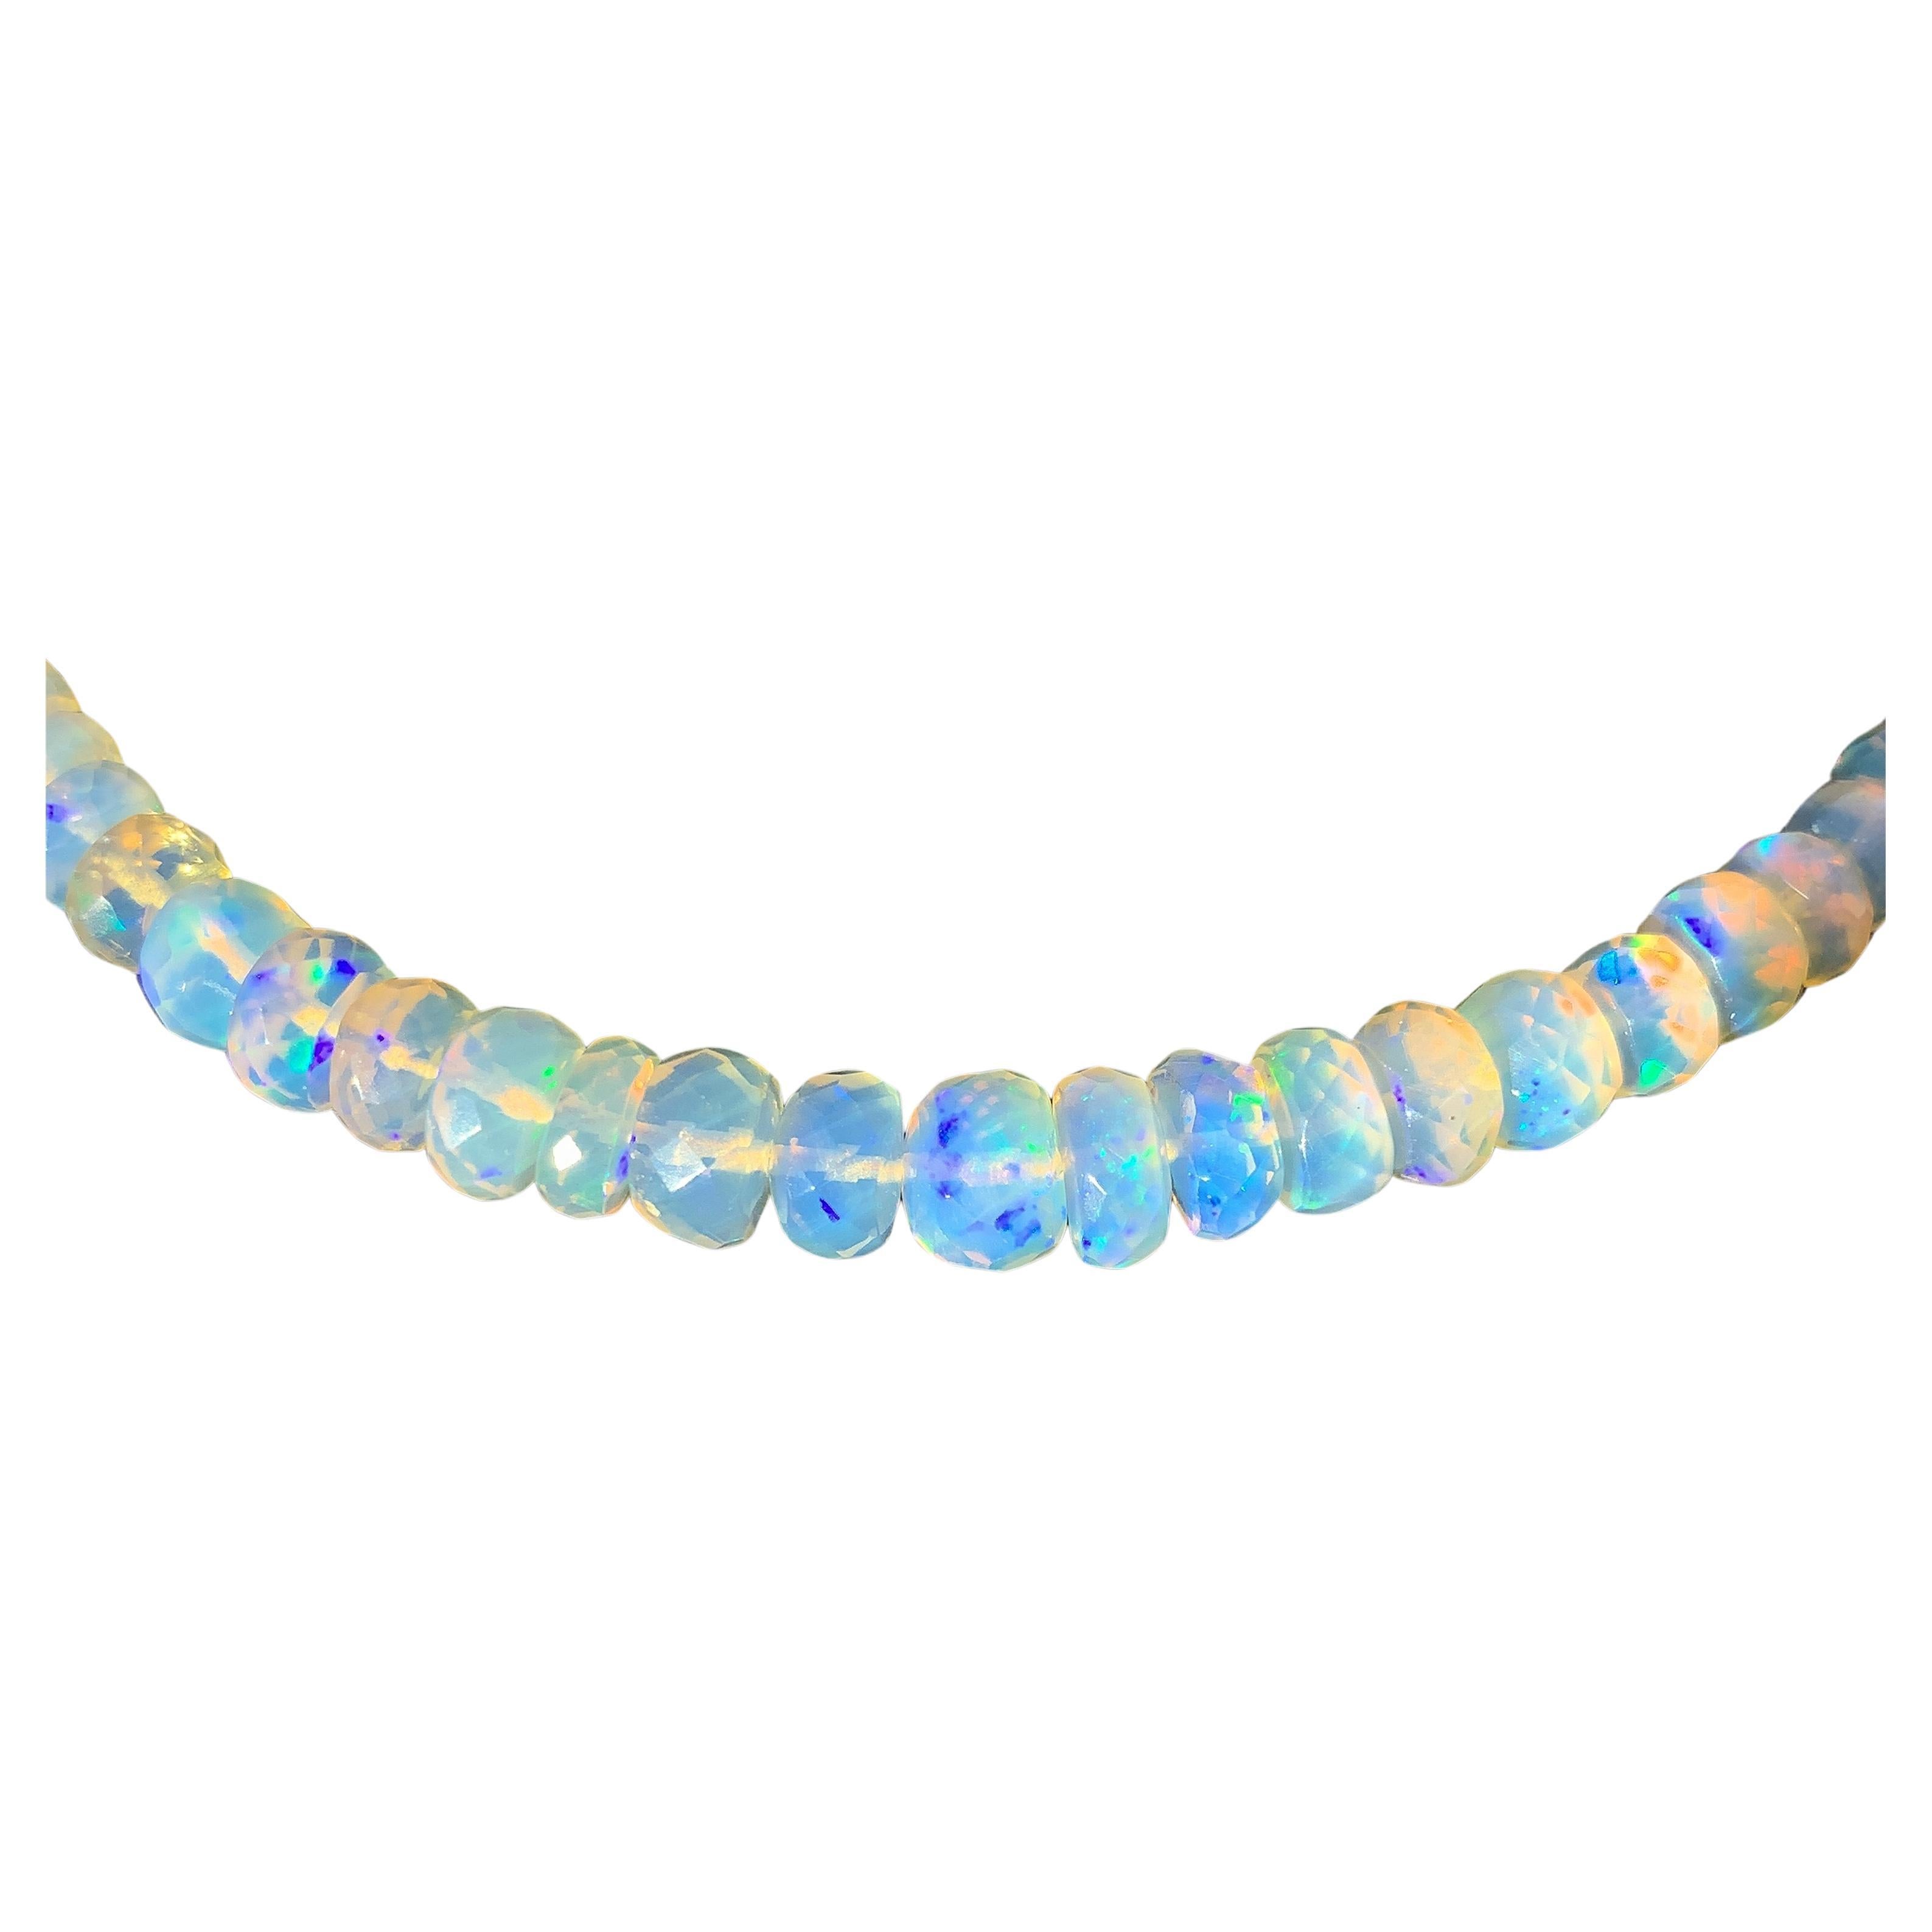 120 carat Strand of Opal Beads 33.5" long with 14K Yellow Gold Clasp For Sale